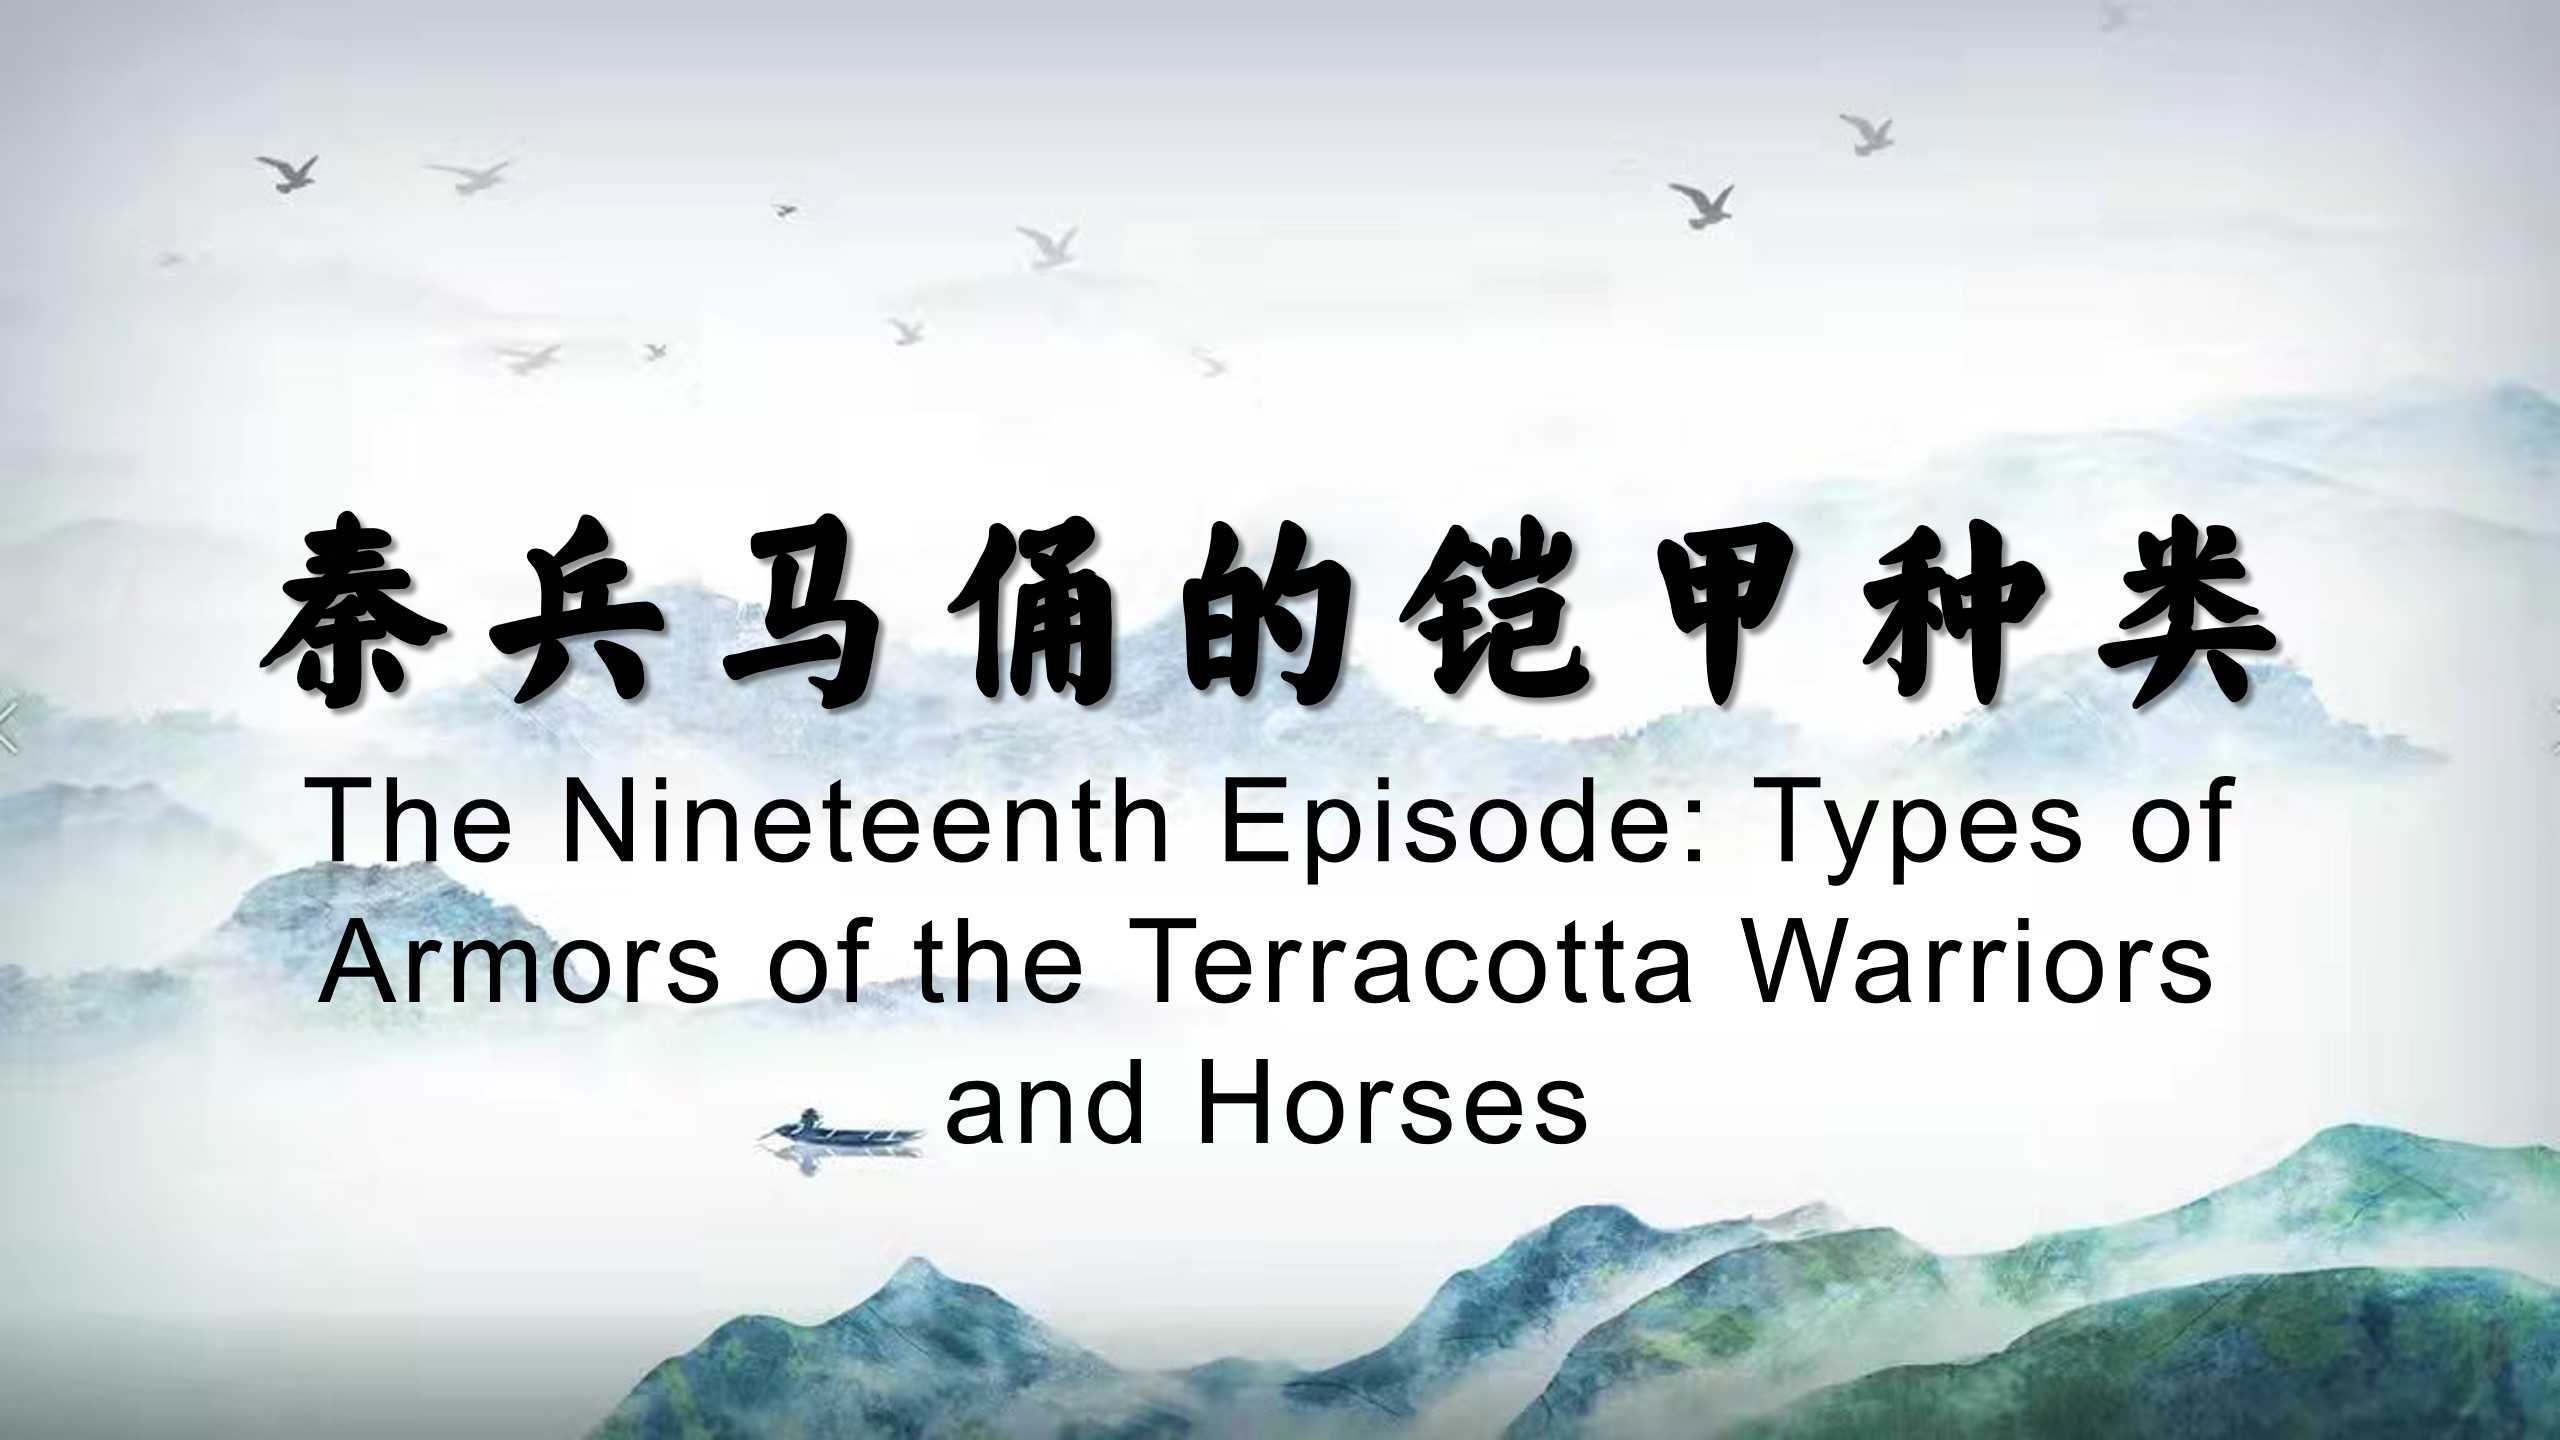 The Nineteenth Episode: Types of Armors of the Terracotta Warriors and Horses